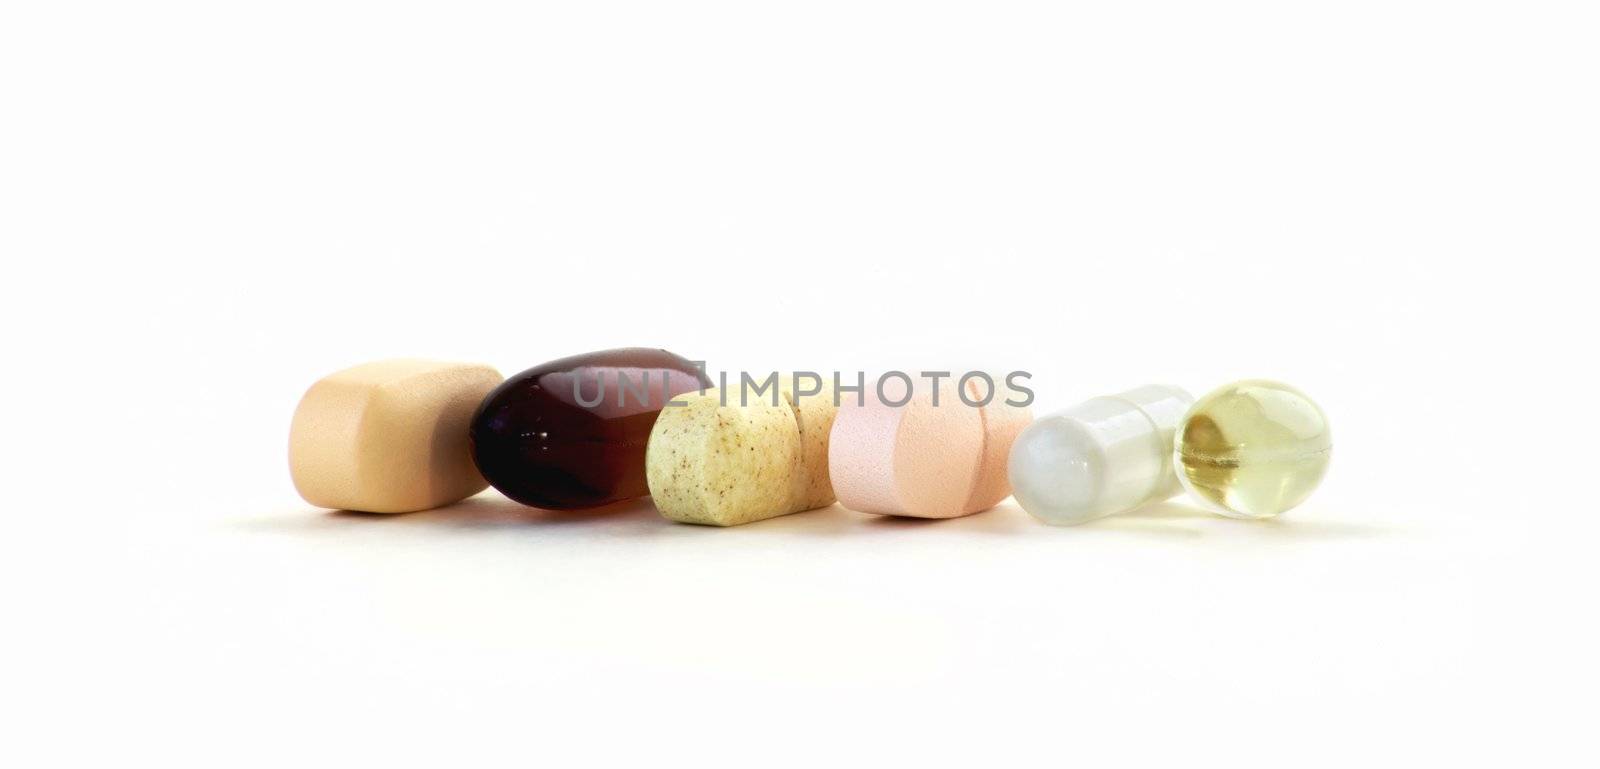 Vitamins and Supplements by Creatista